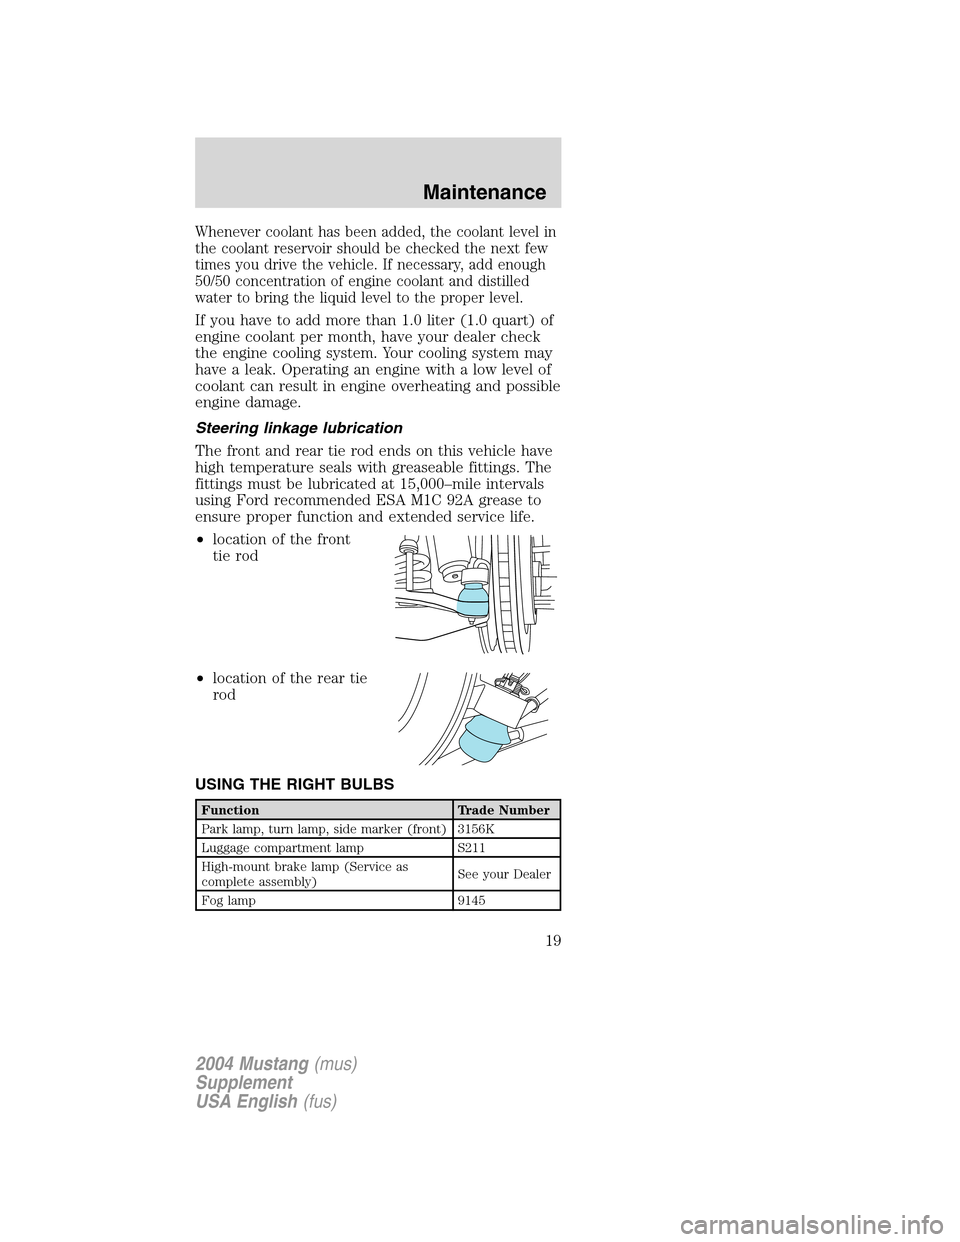 FORD MUSTANG 2004 4.G SVT Supplement Manual Whenever coolant has been added, the coolant level in
the coolant reservoir should be checked the next few
times you drive the vehicle. If necessary, add enough
50/50 concentration of engine coolant a